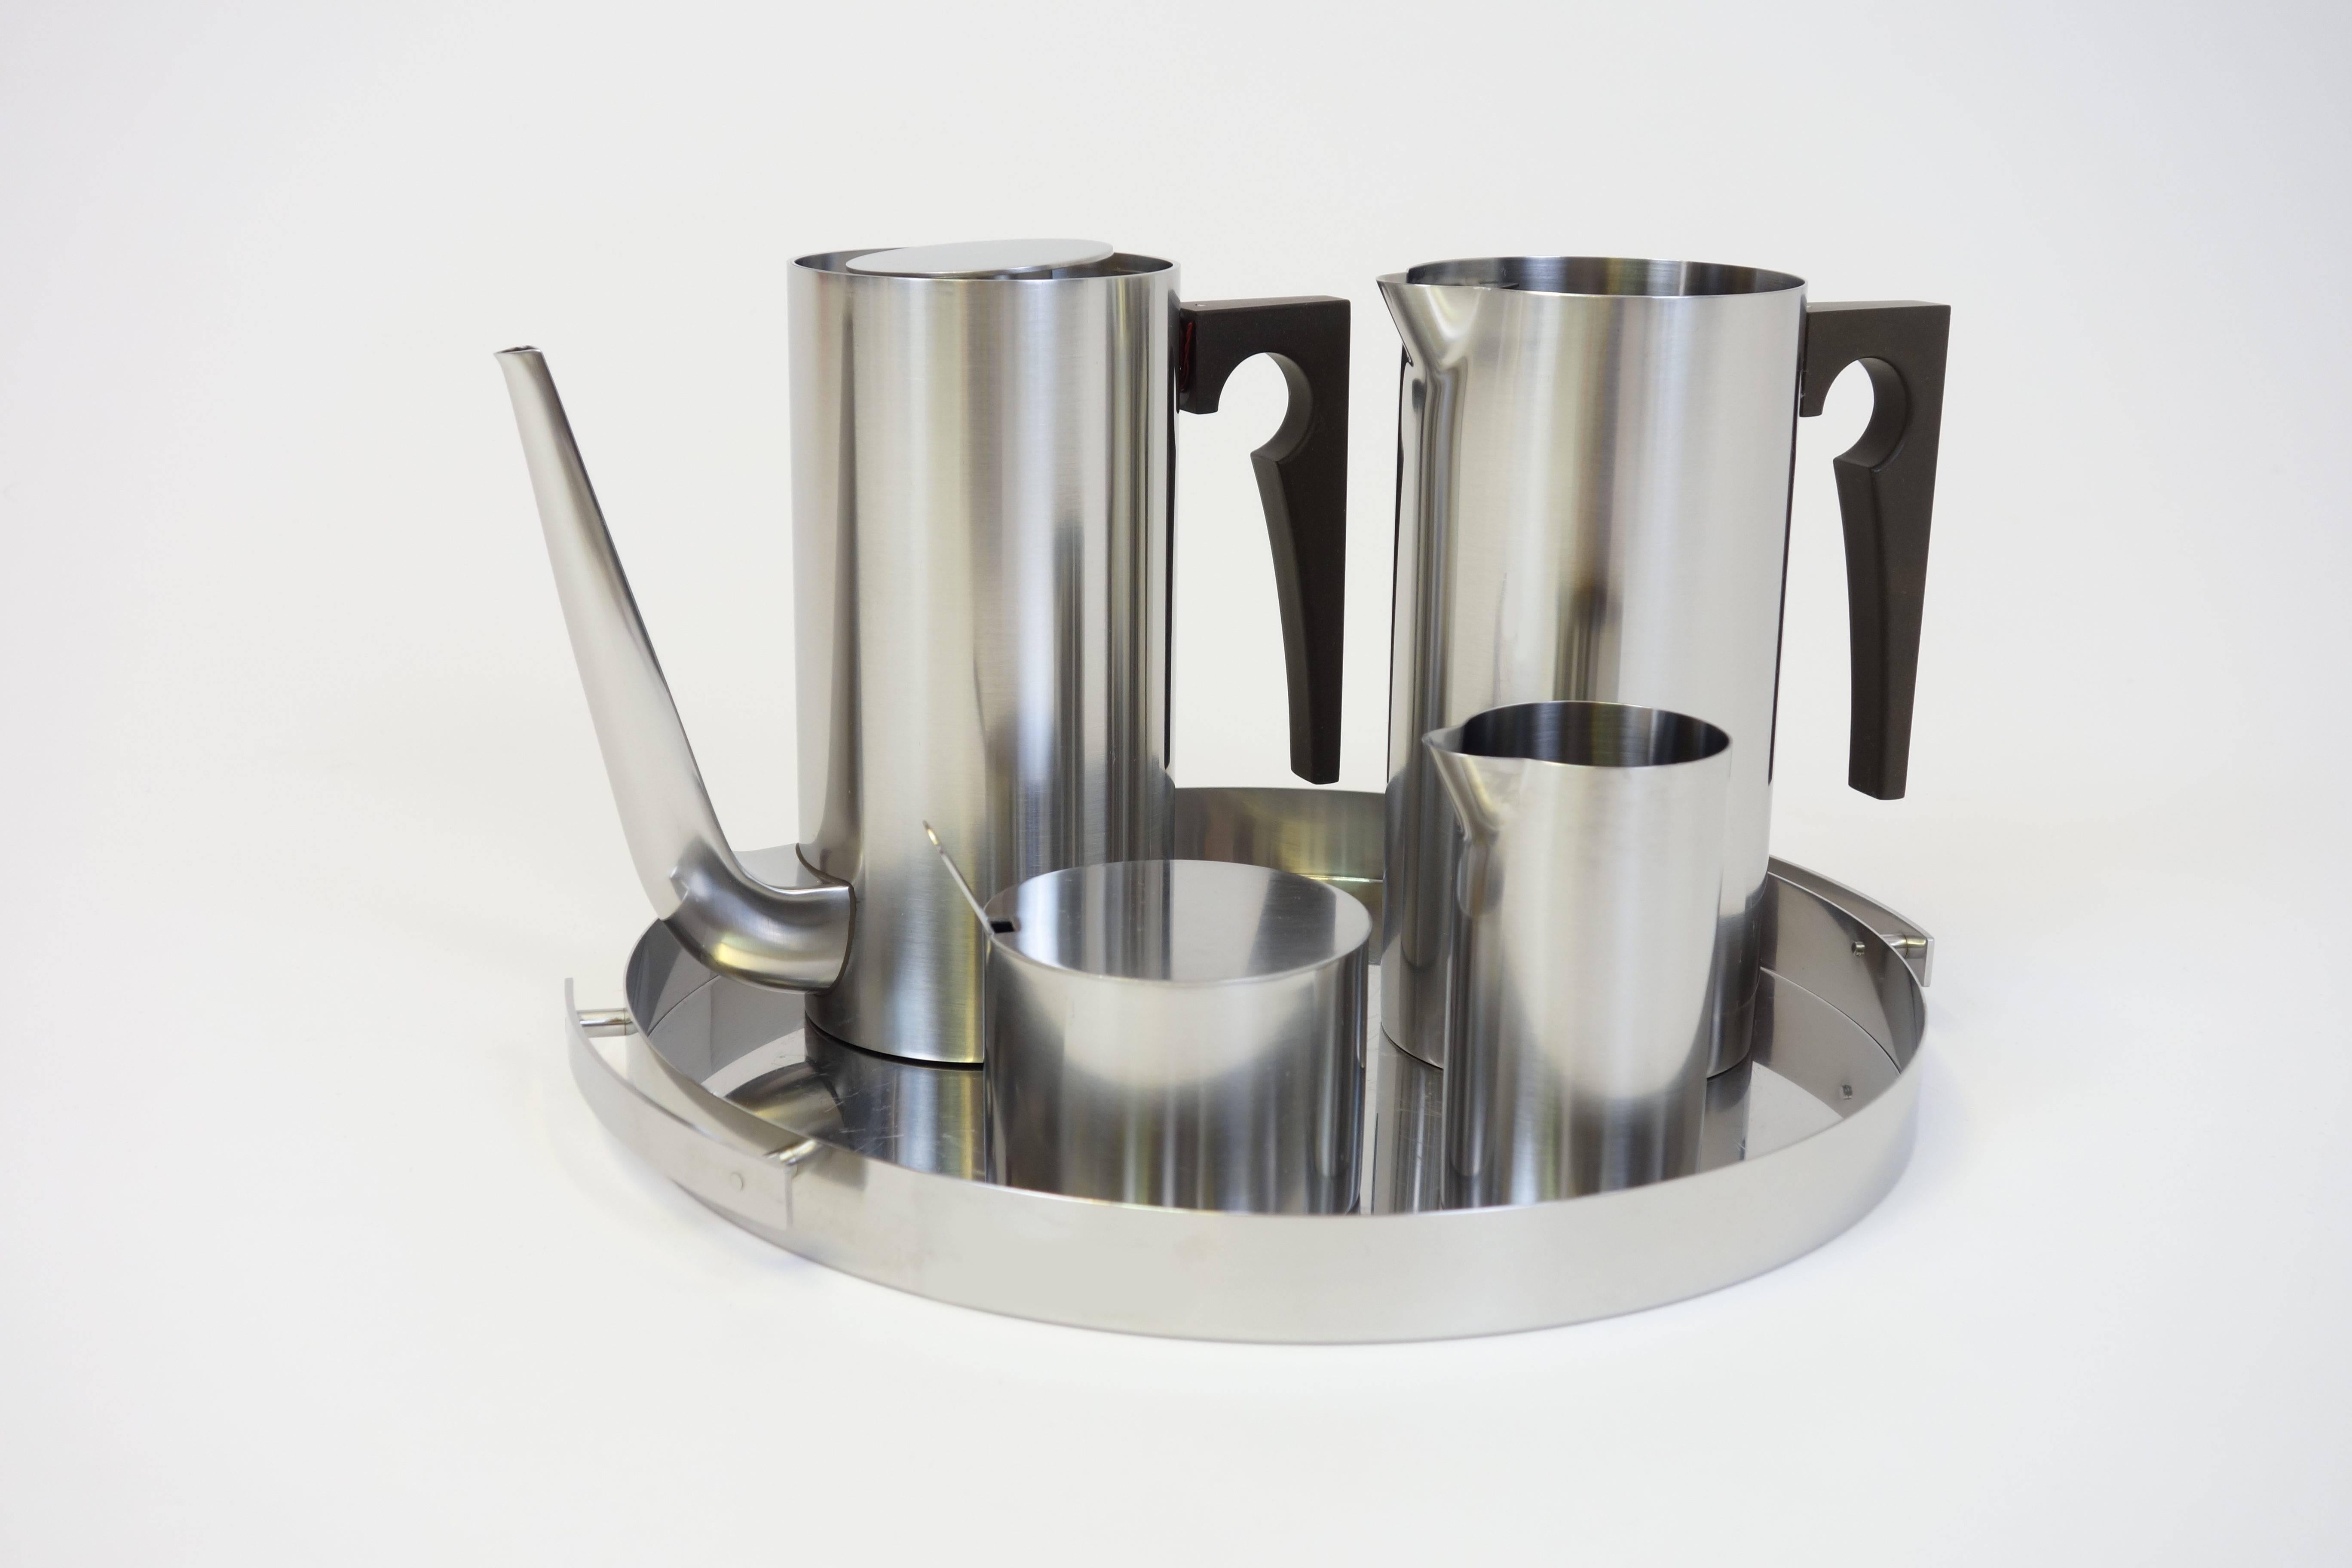 Moka set “Cylinda Line” by Arne Jacobsen for Stelton, 1967. Brushed stainless steel with black bakelite handles. We offer a moka pot, a milk jug, a sugar bowl with original spoon and a water jug including serving tray. Trend-setting for the